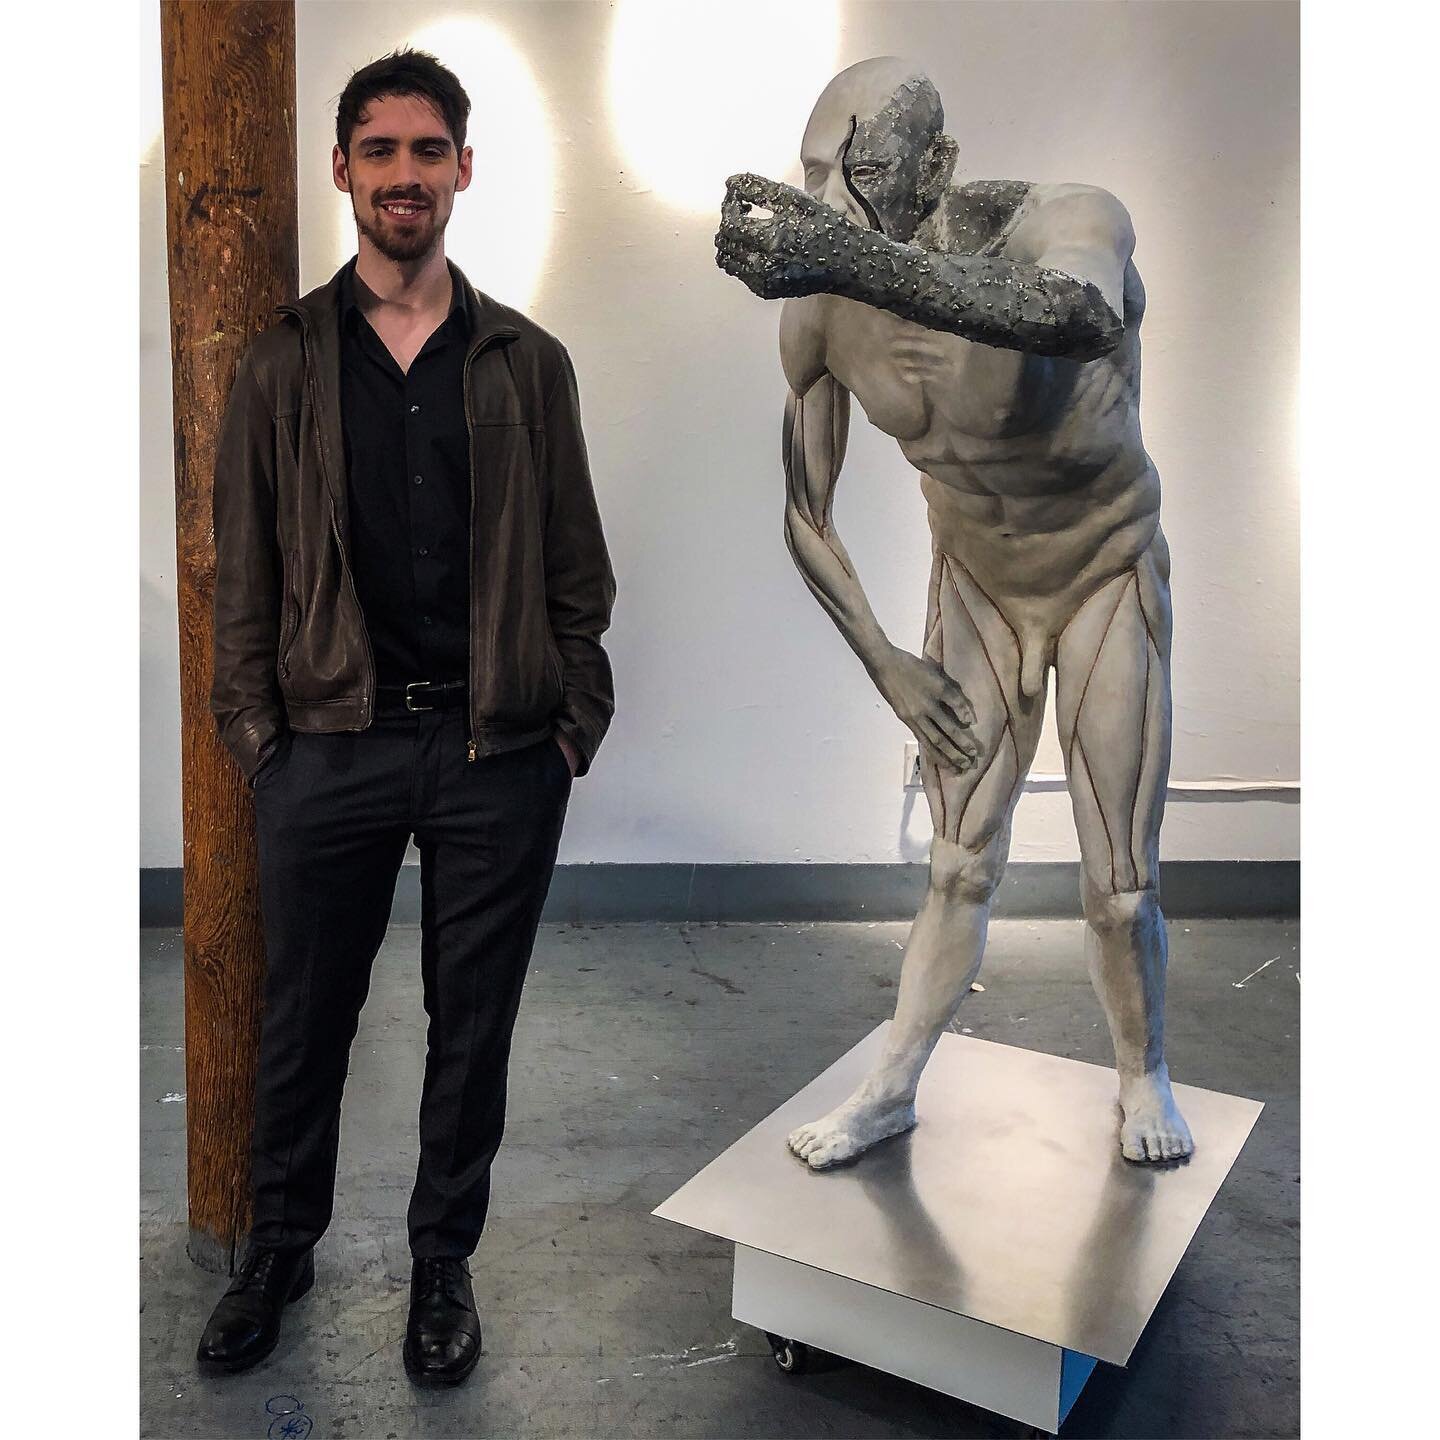 Yesterday I had my final thesis critique at the New York Academy of art. The past two years have been an amazing, irreplaceable experience. This life-size figure, almost finished and yet to be titled, is the culmination of months of labor and countle